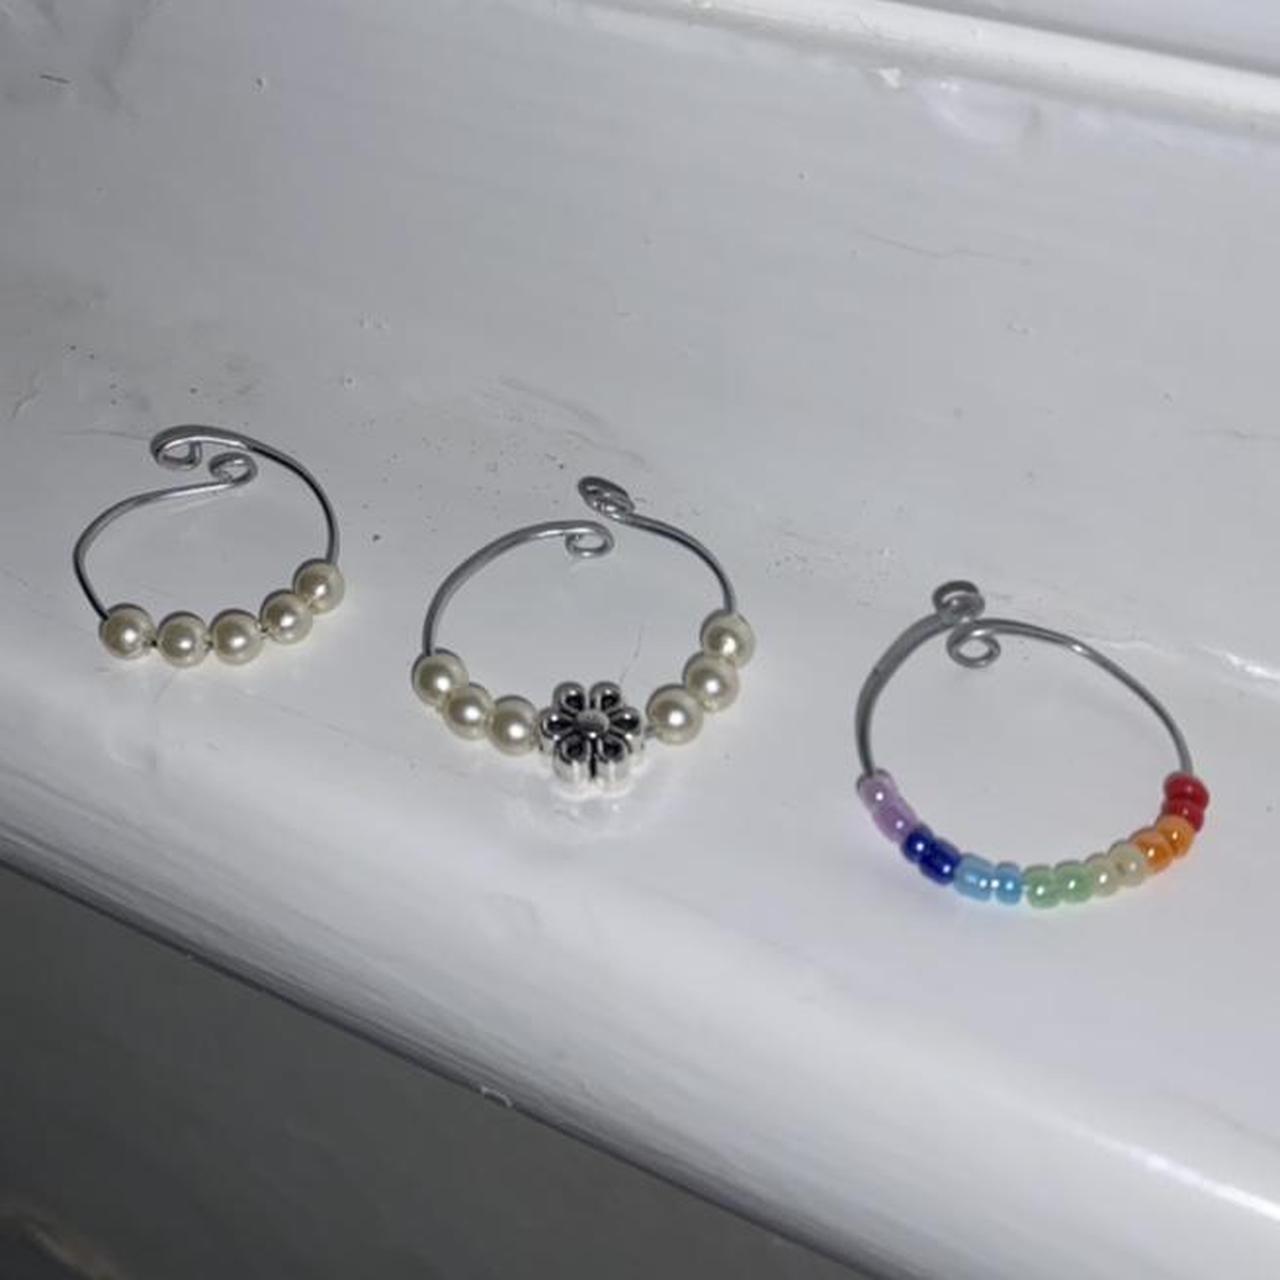 Product Image 4 - Anxiety rings!
Please message me which